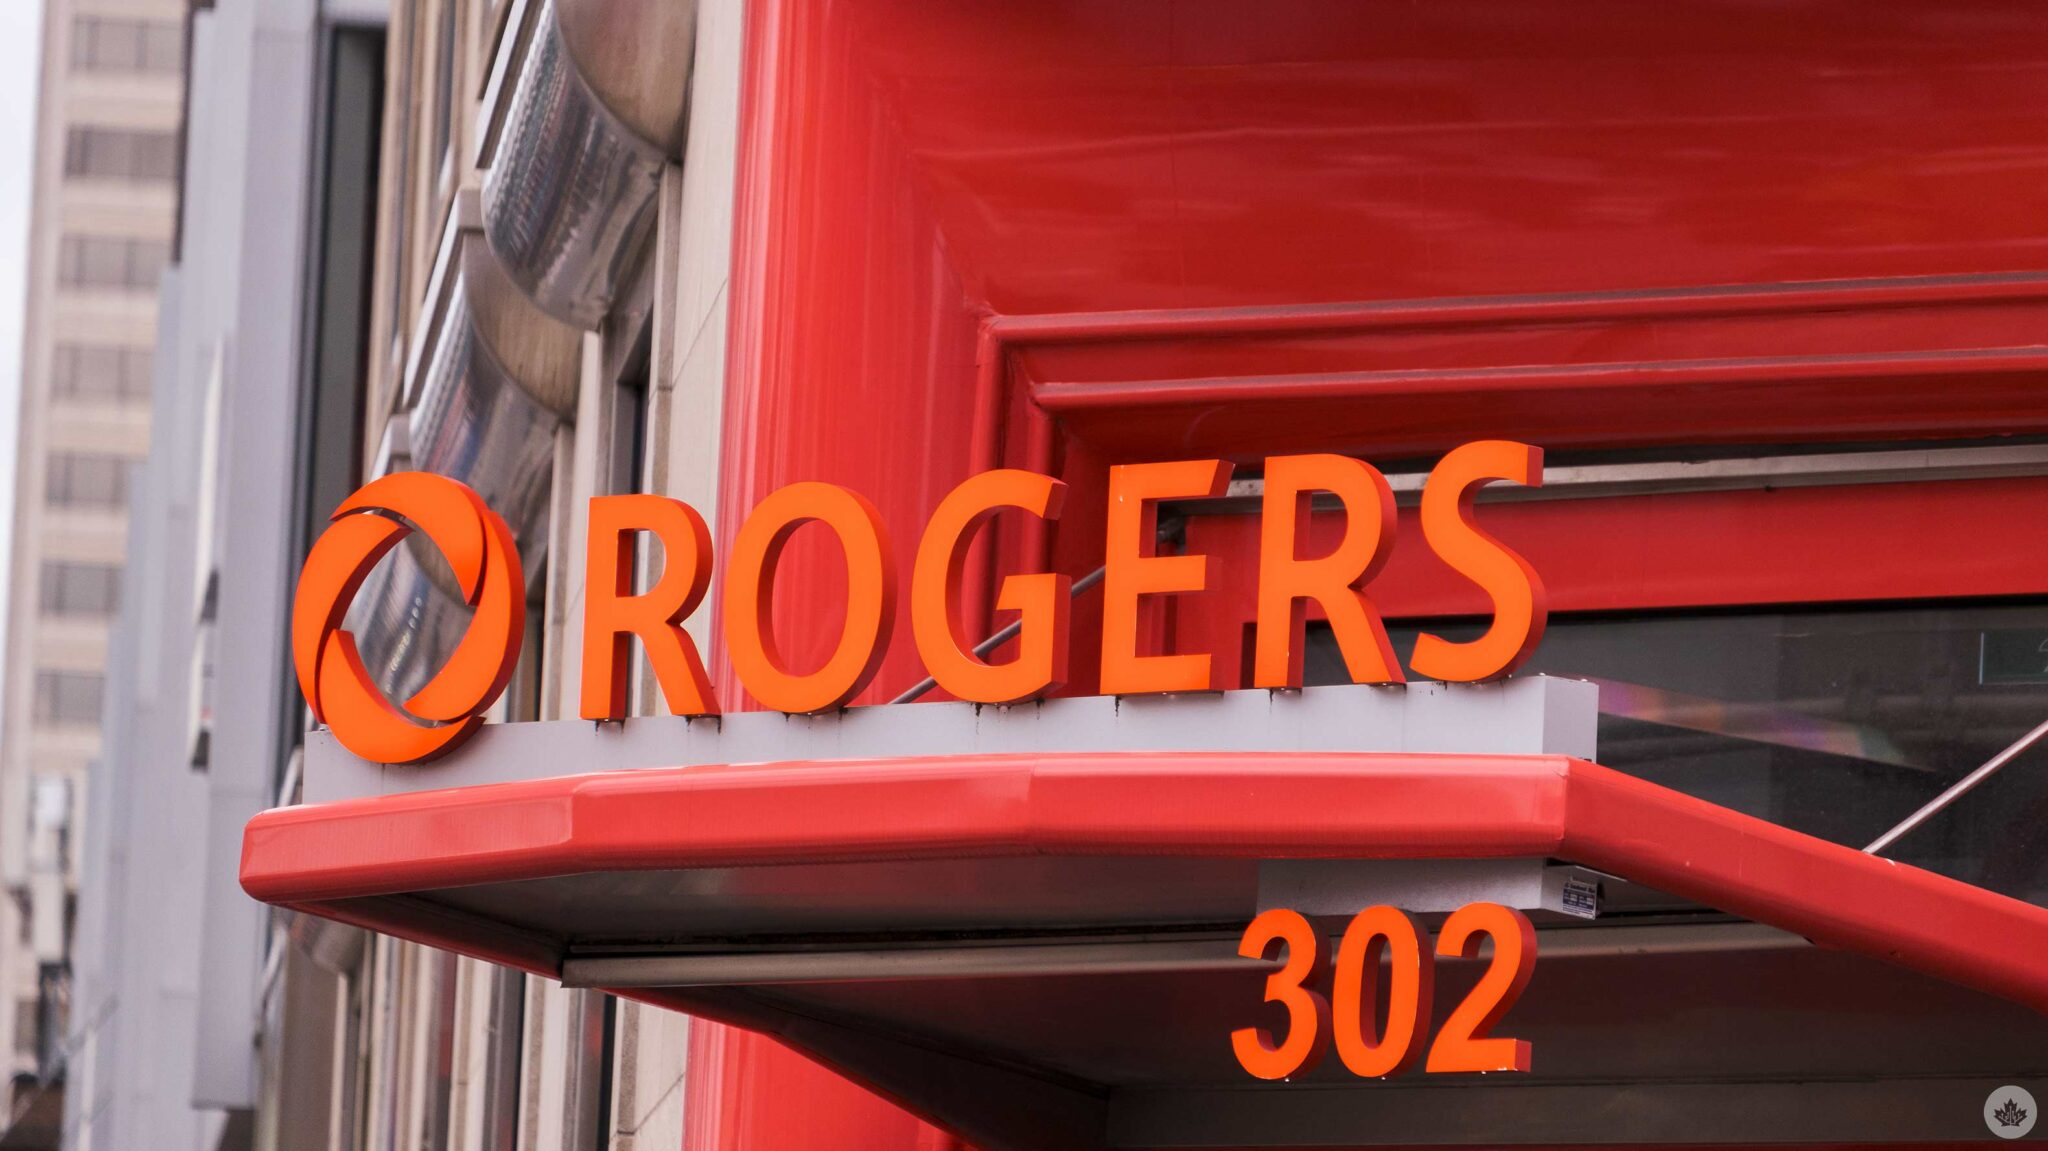 CRTC orders Rogers to disclose redacted details on July outage